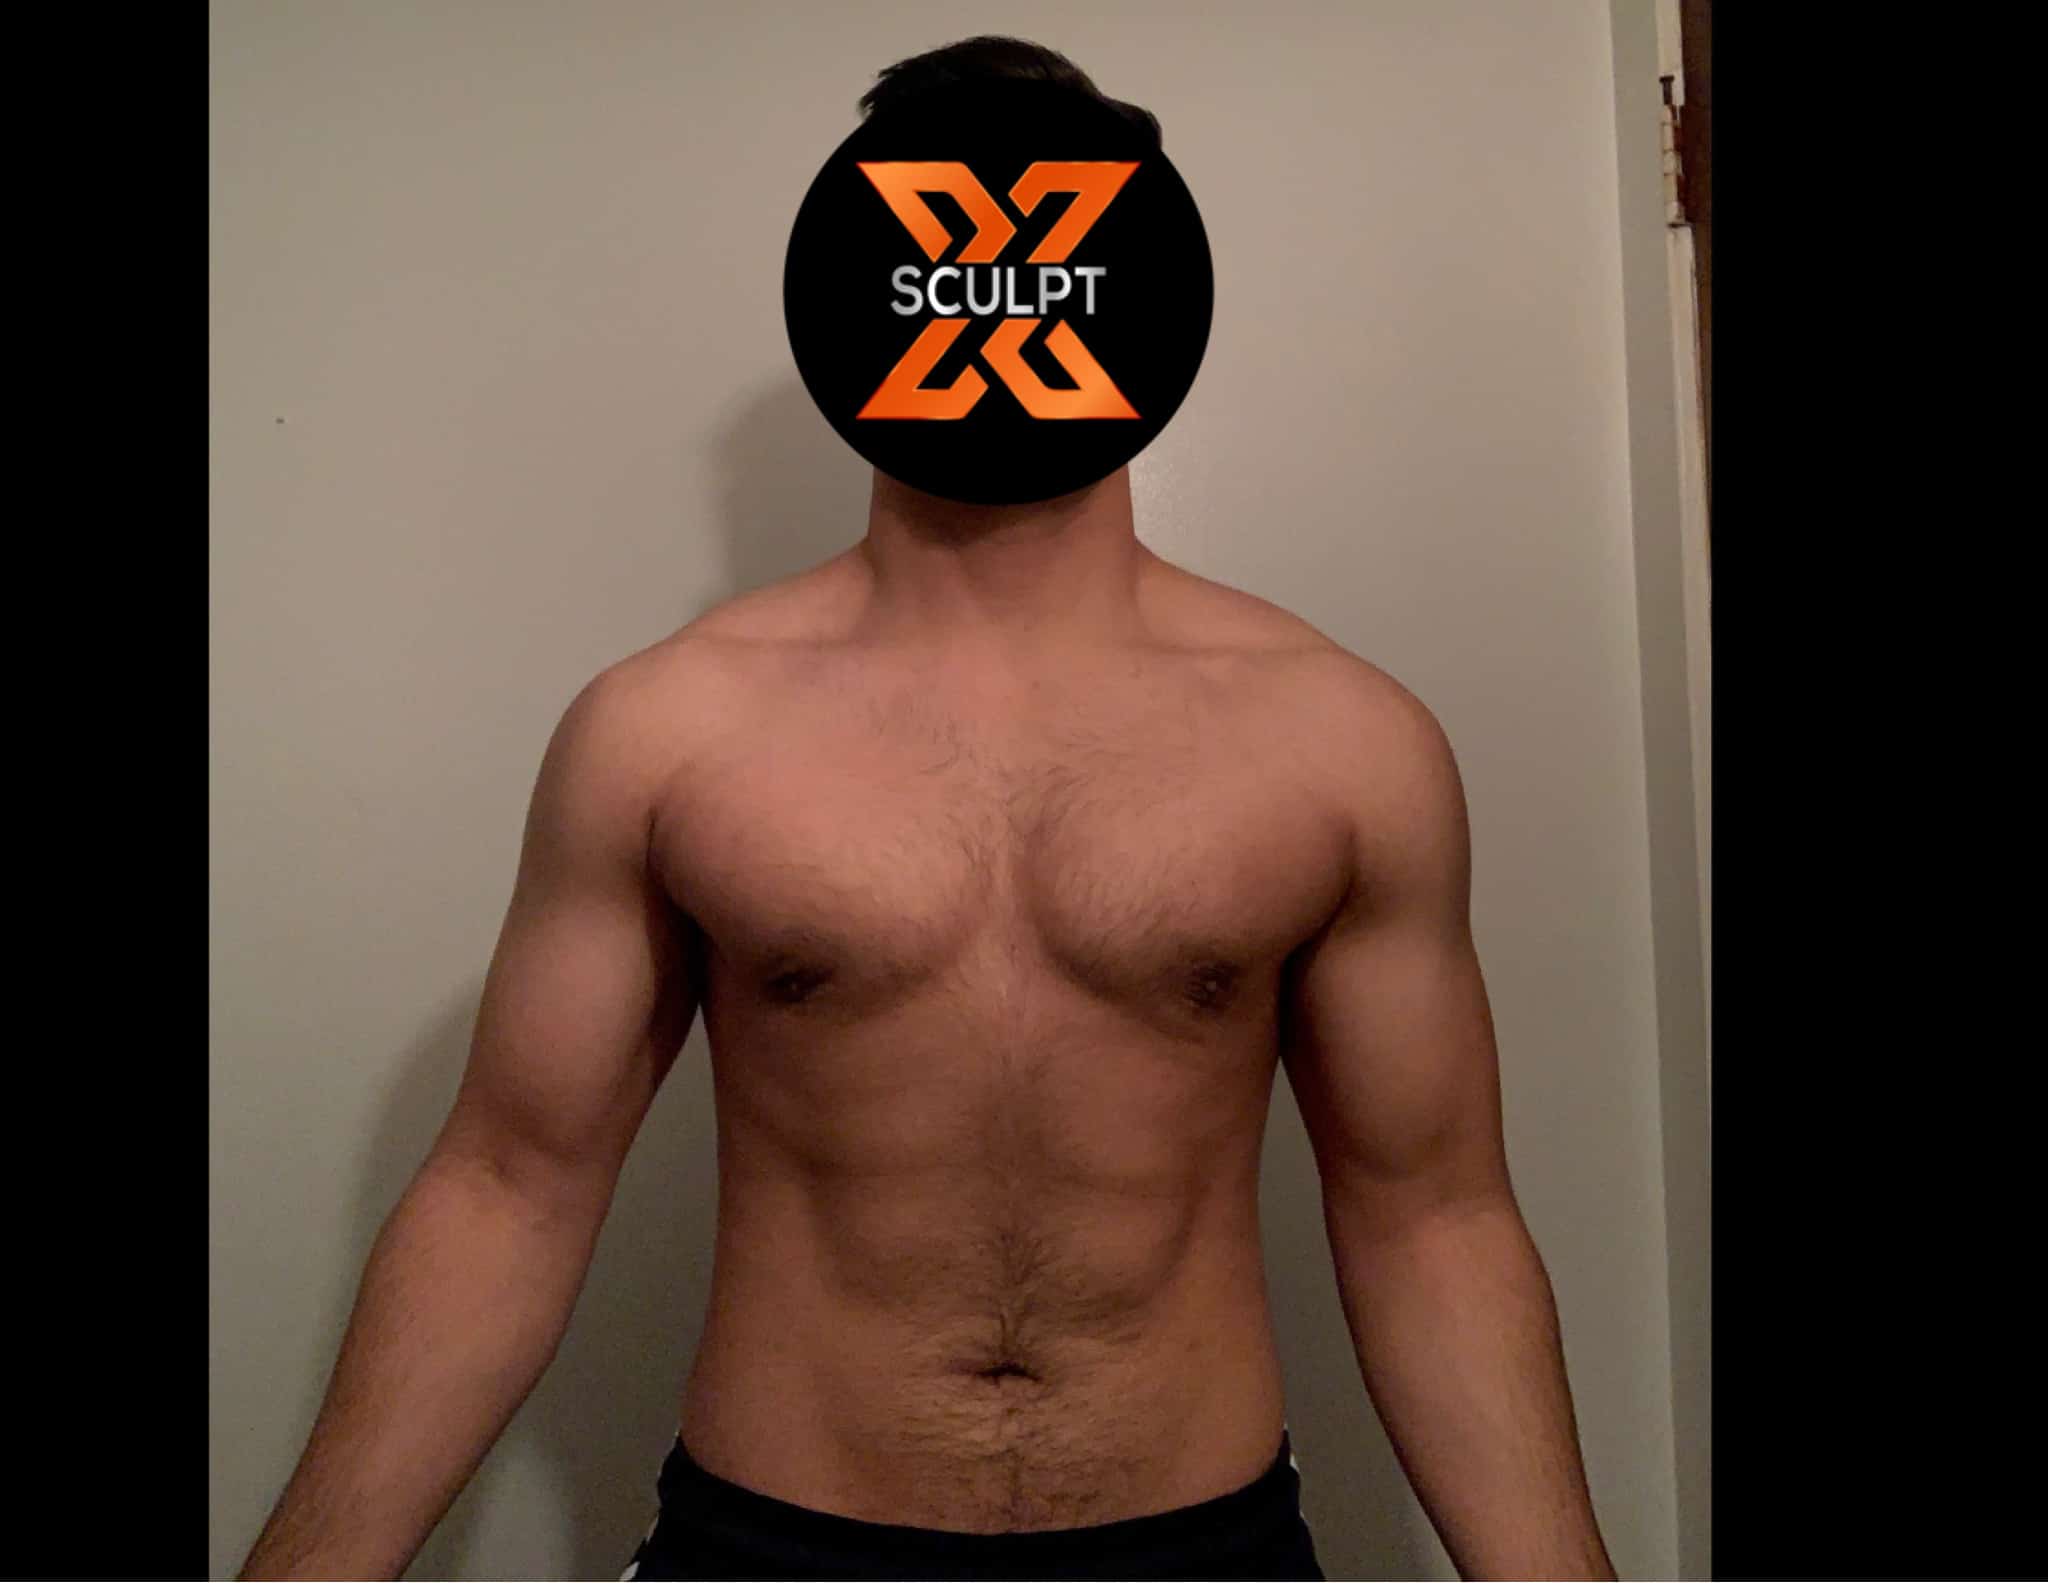 Xsculpt “The best experience from start to finish”